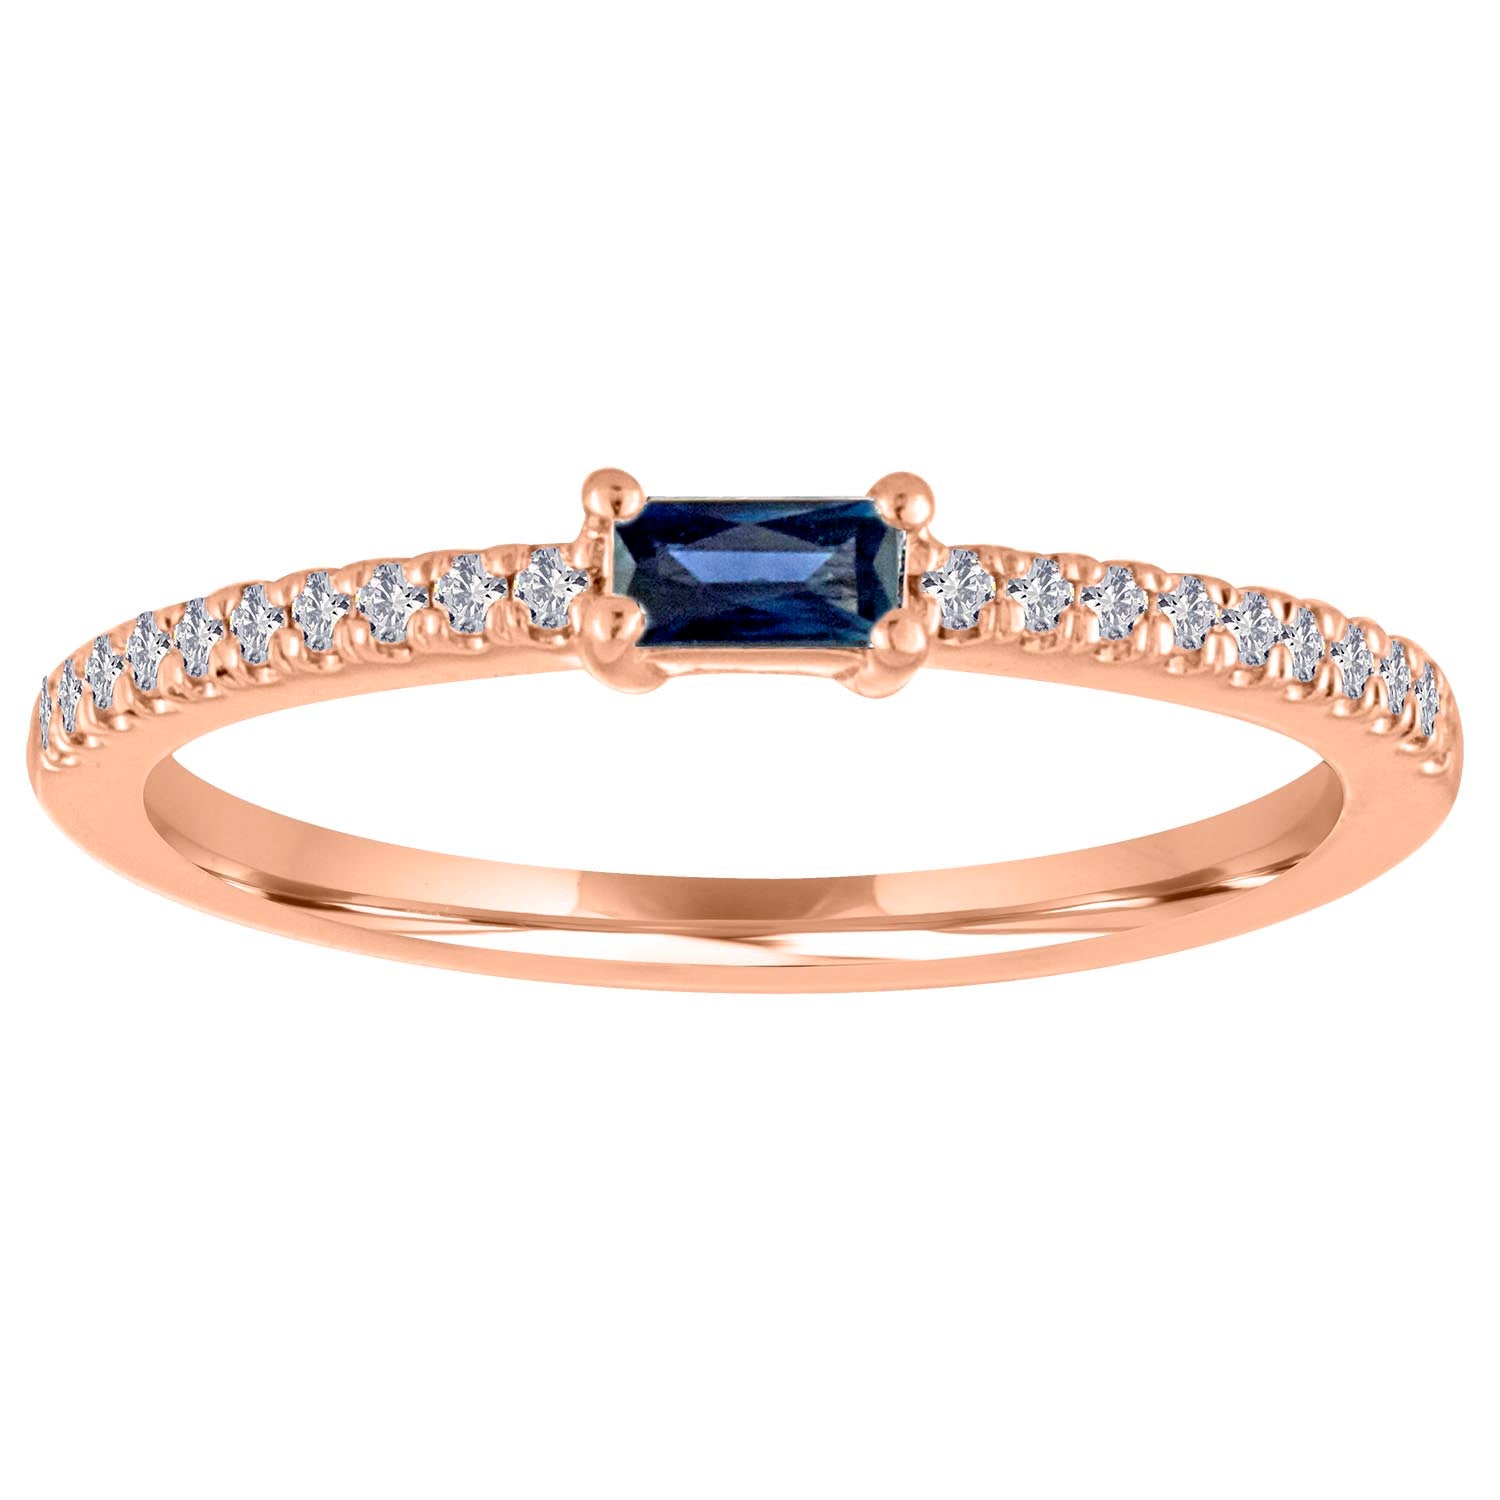 The Julia Ring